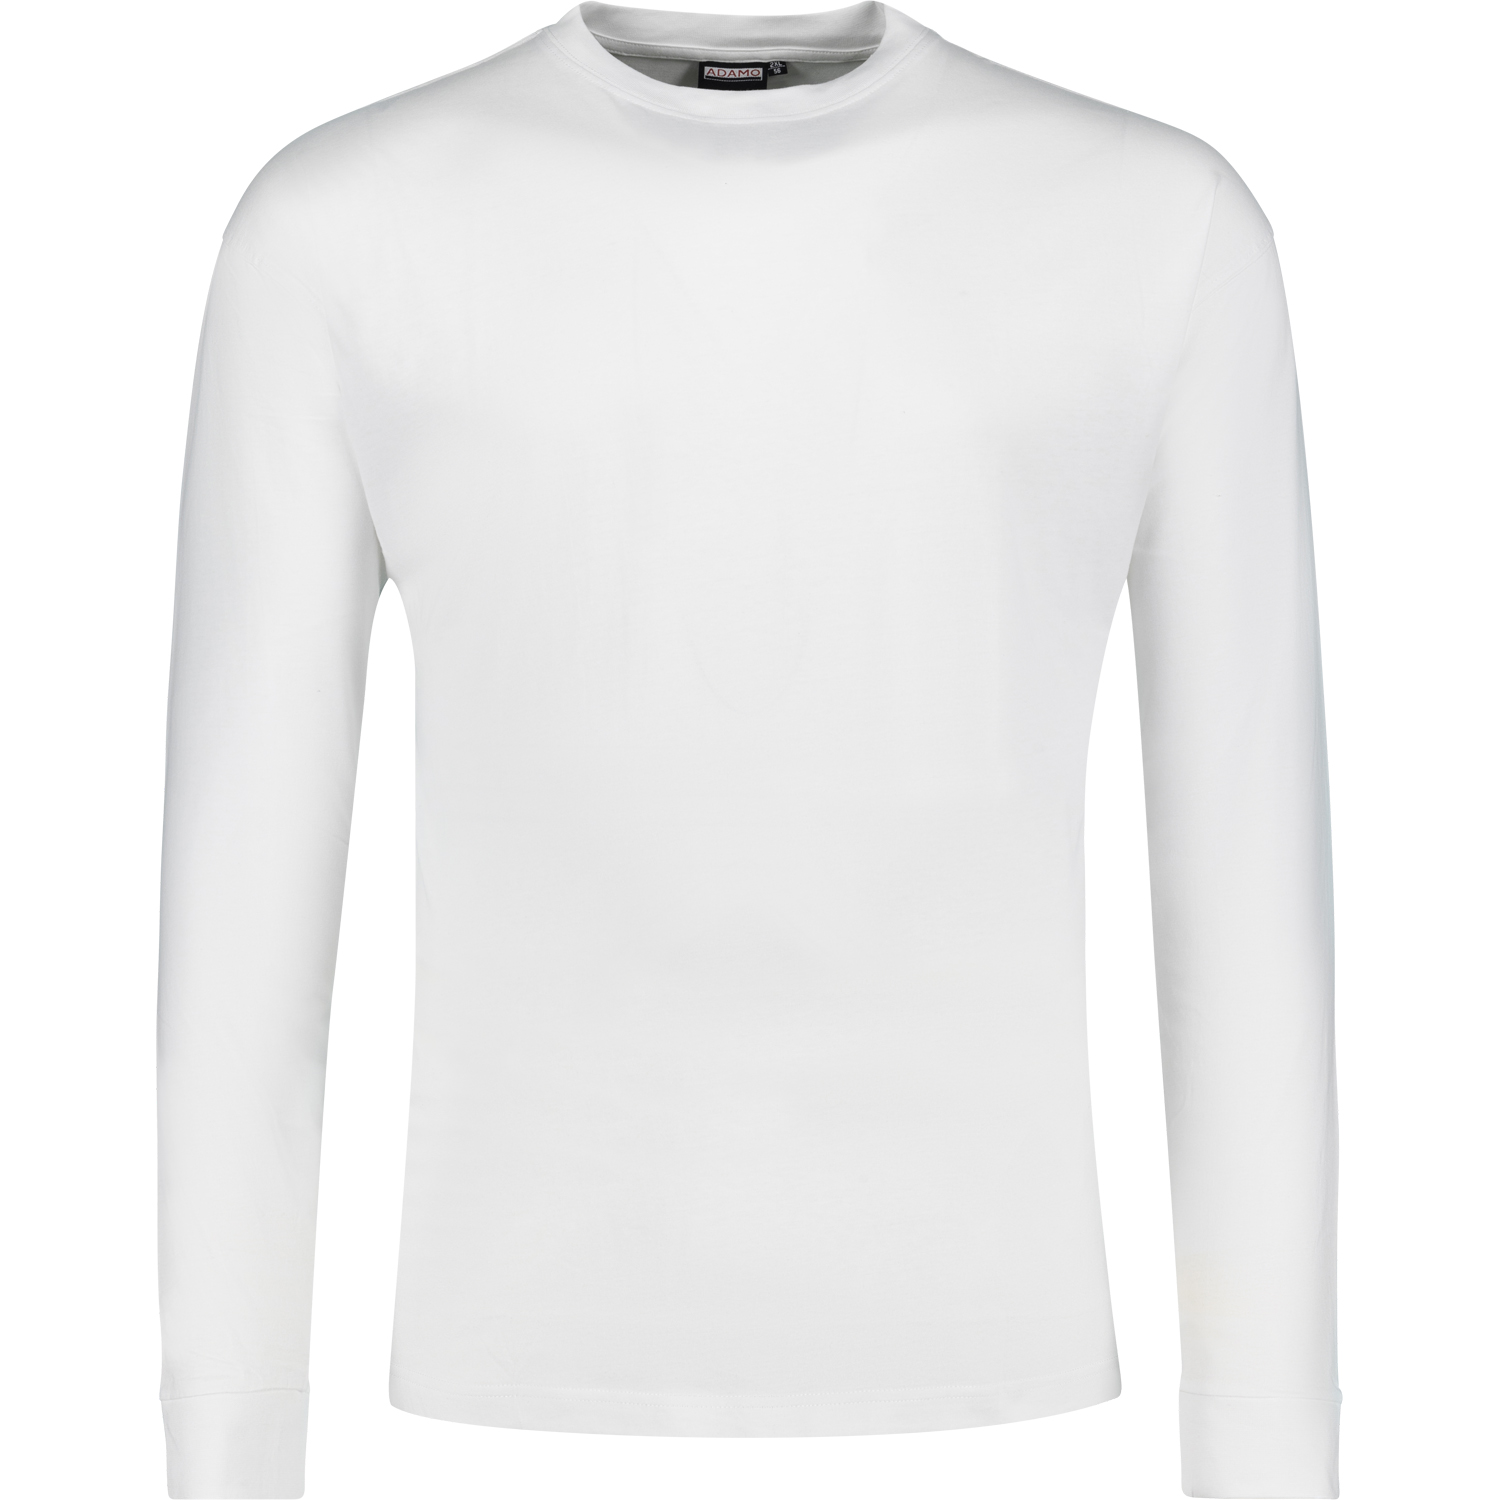 ADAMO longsleeve COMFORT FIT for men in white with round neck up to size 12XL